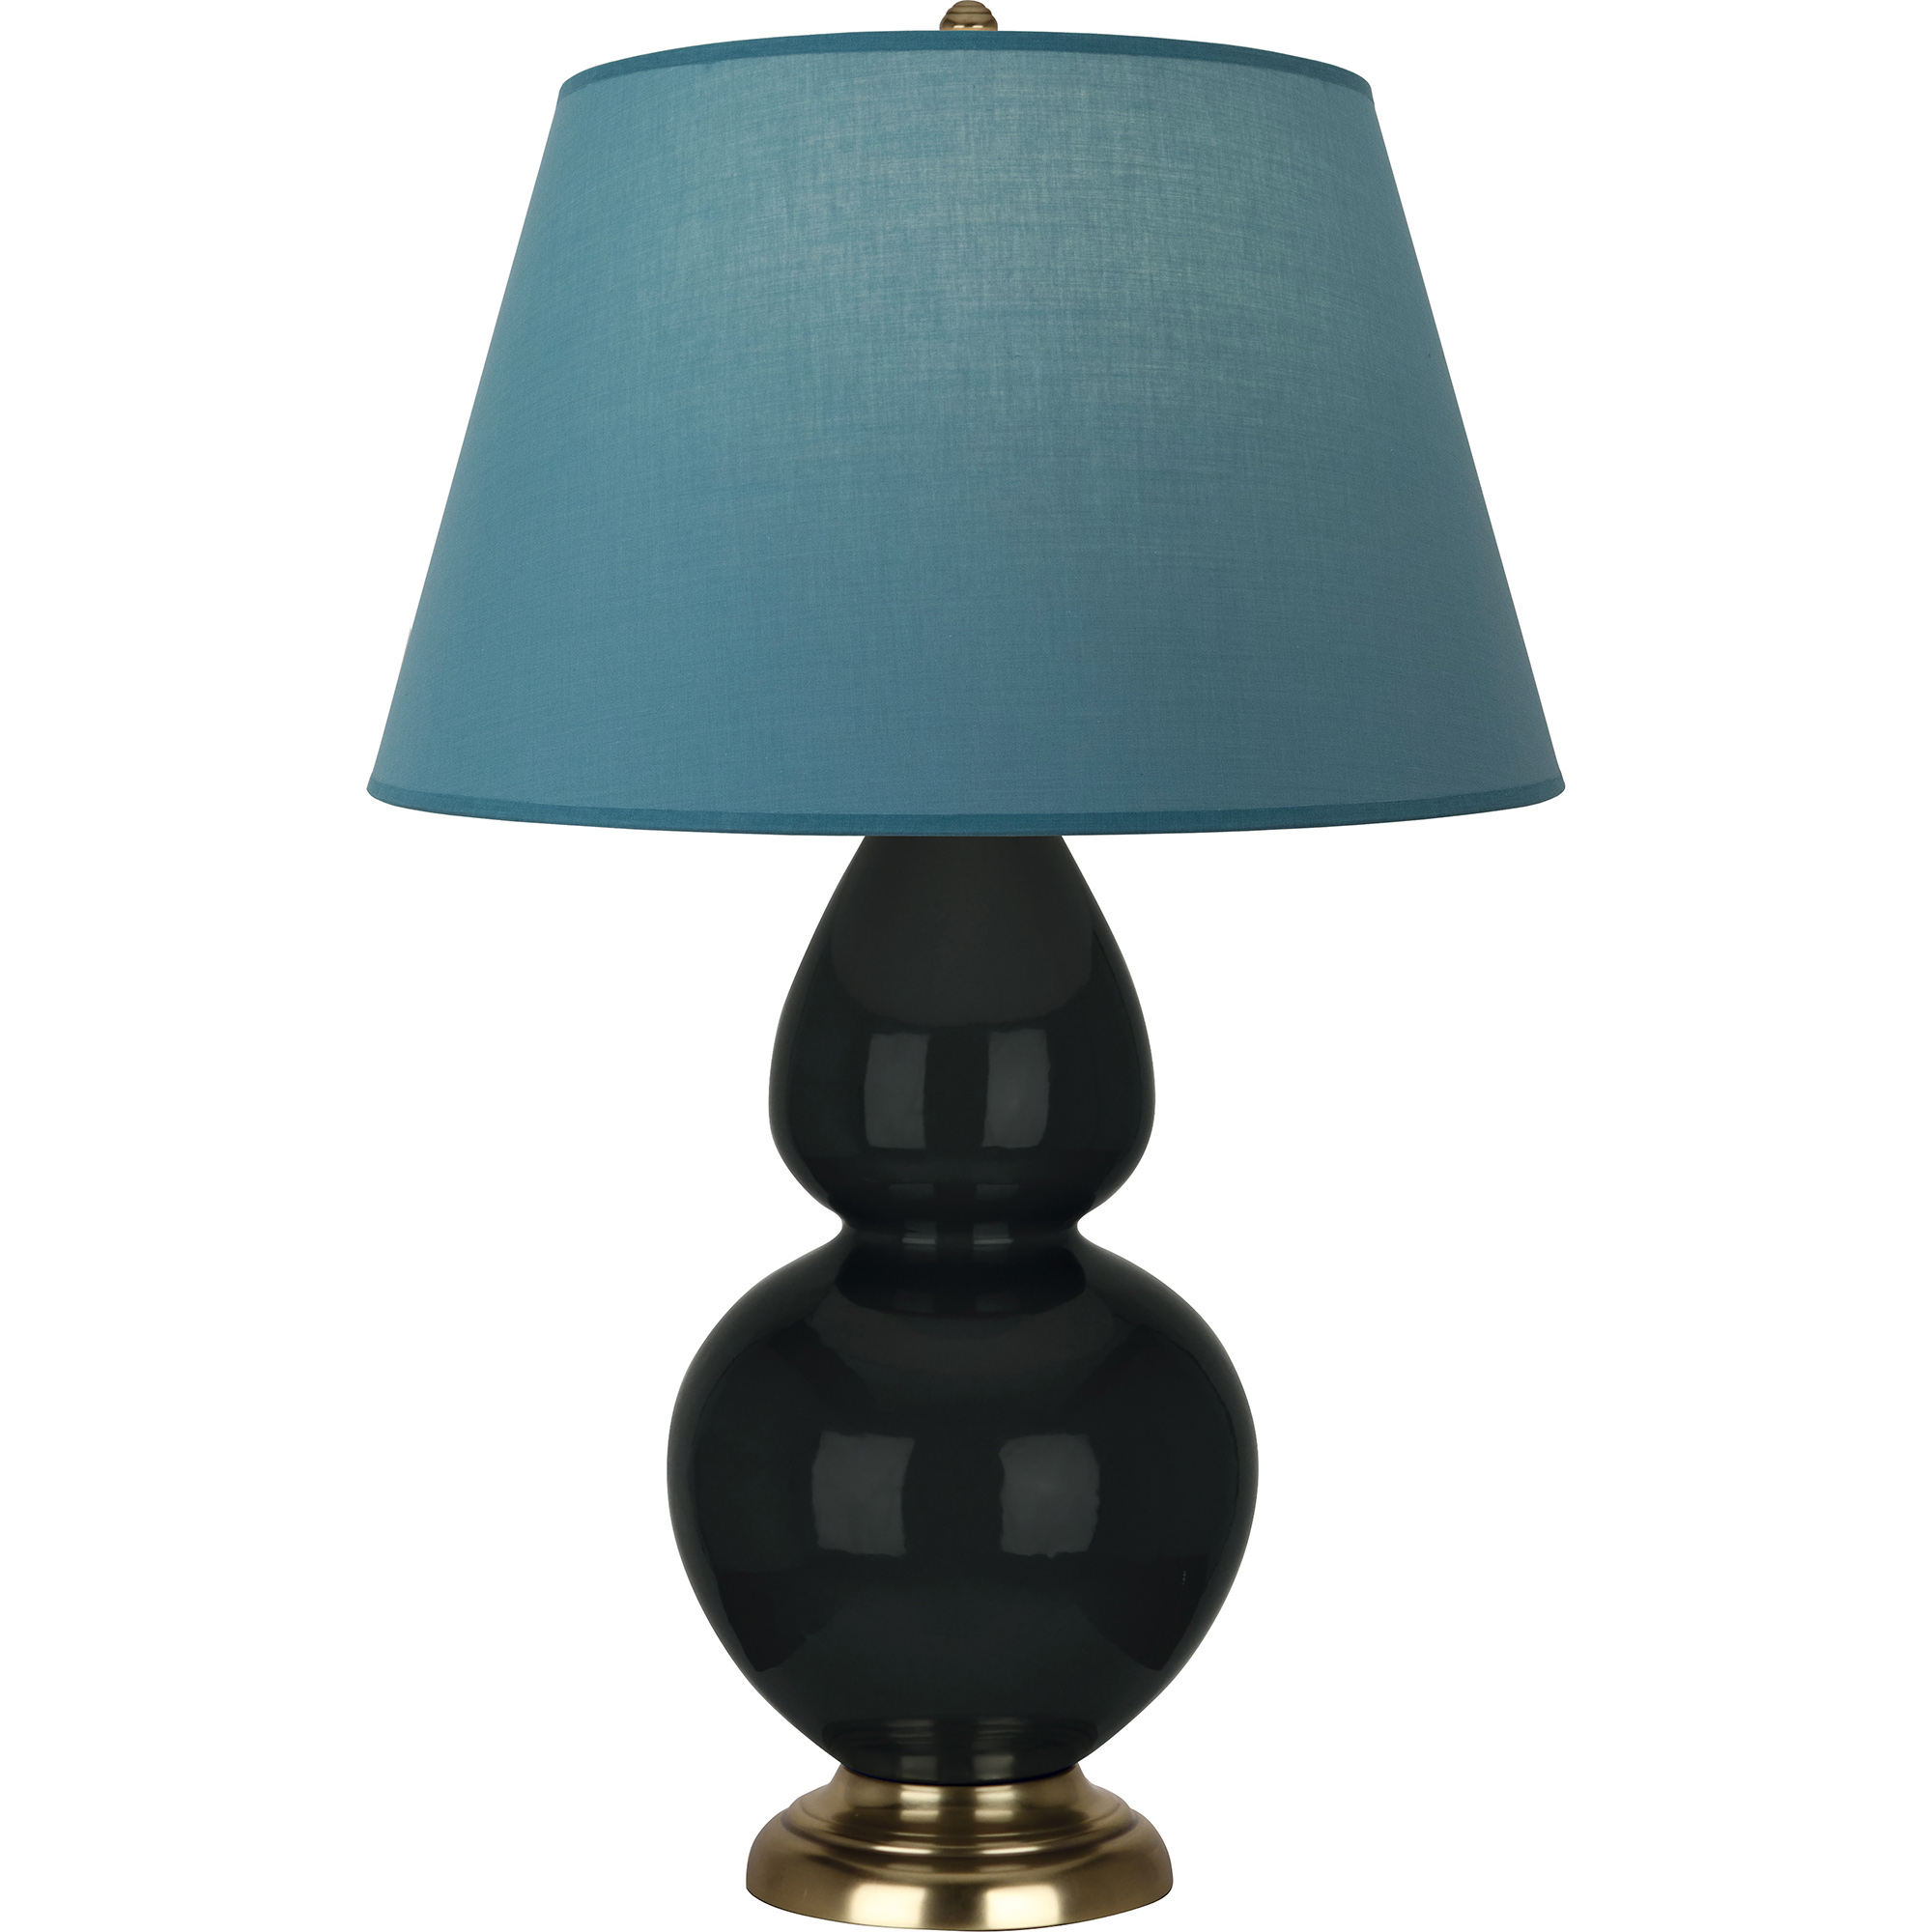 Double Gourd Table Lamp Style #OS20B